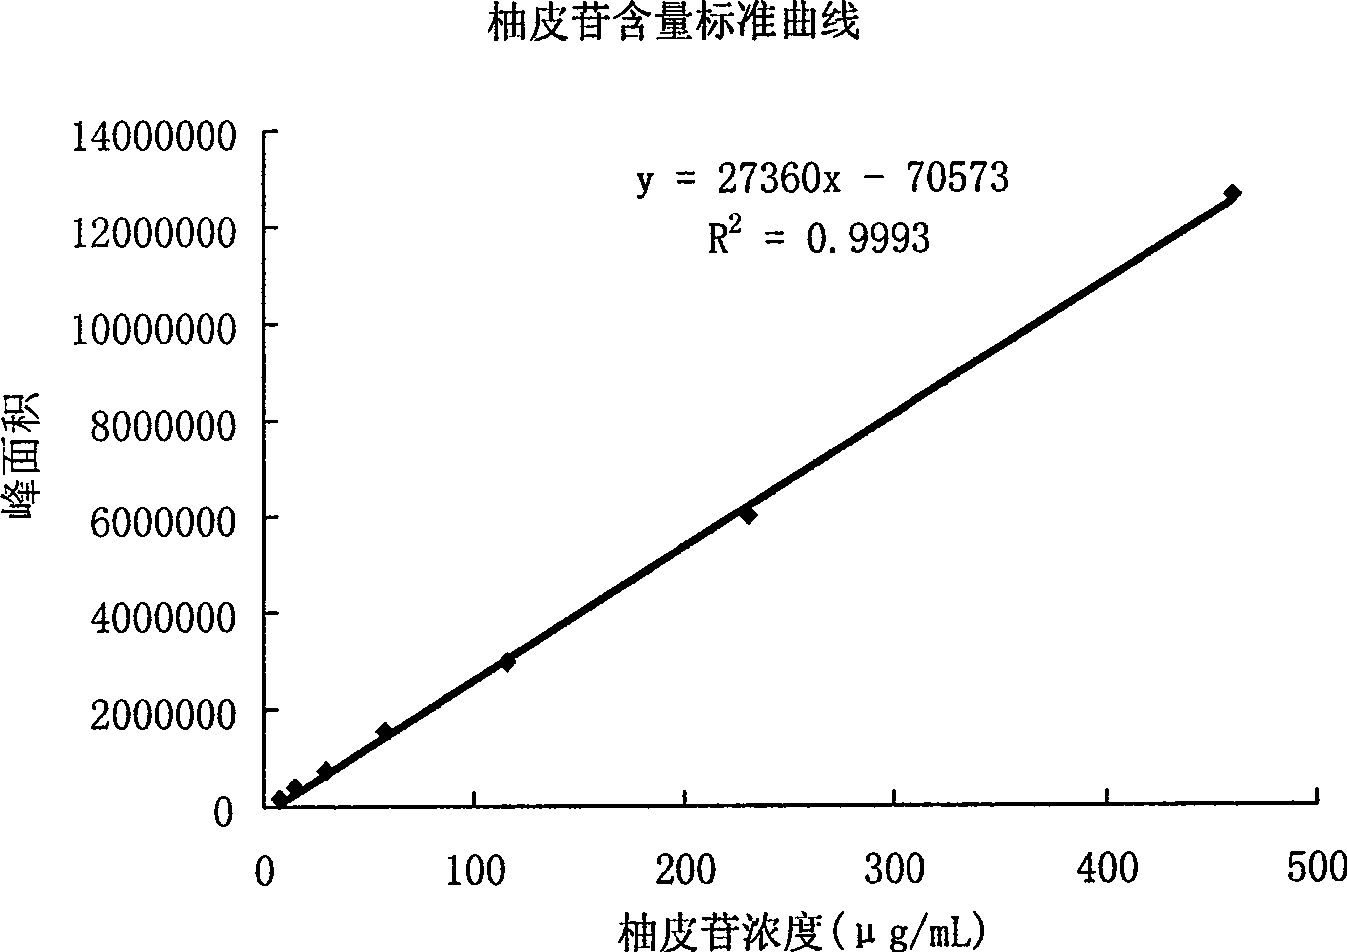 Culture medium for fermenting naringinase, preparation and use method thereof